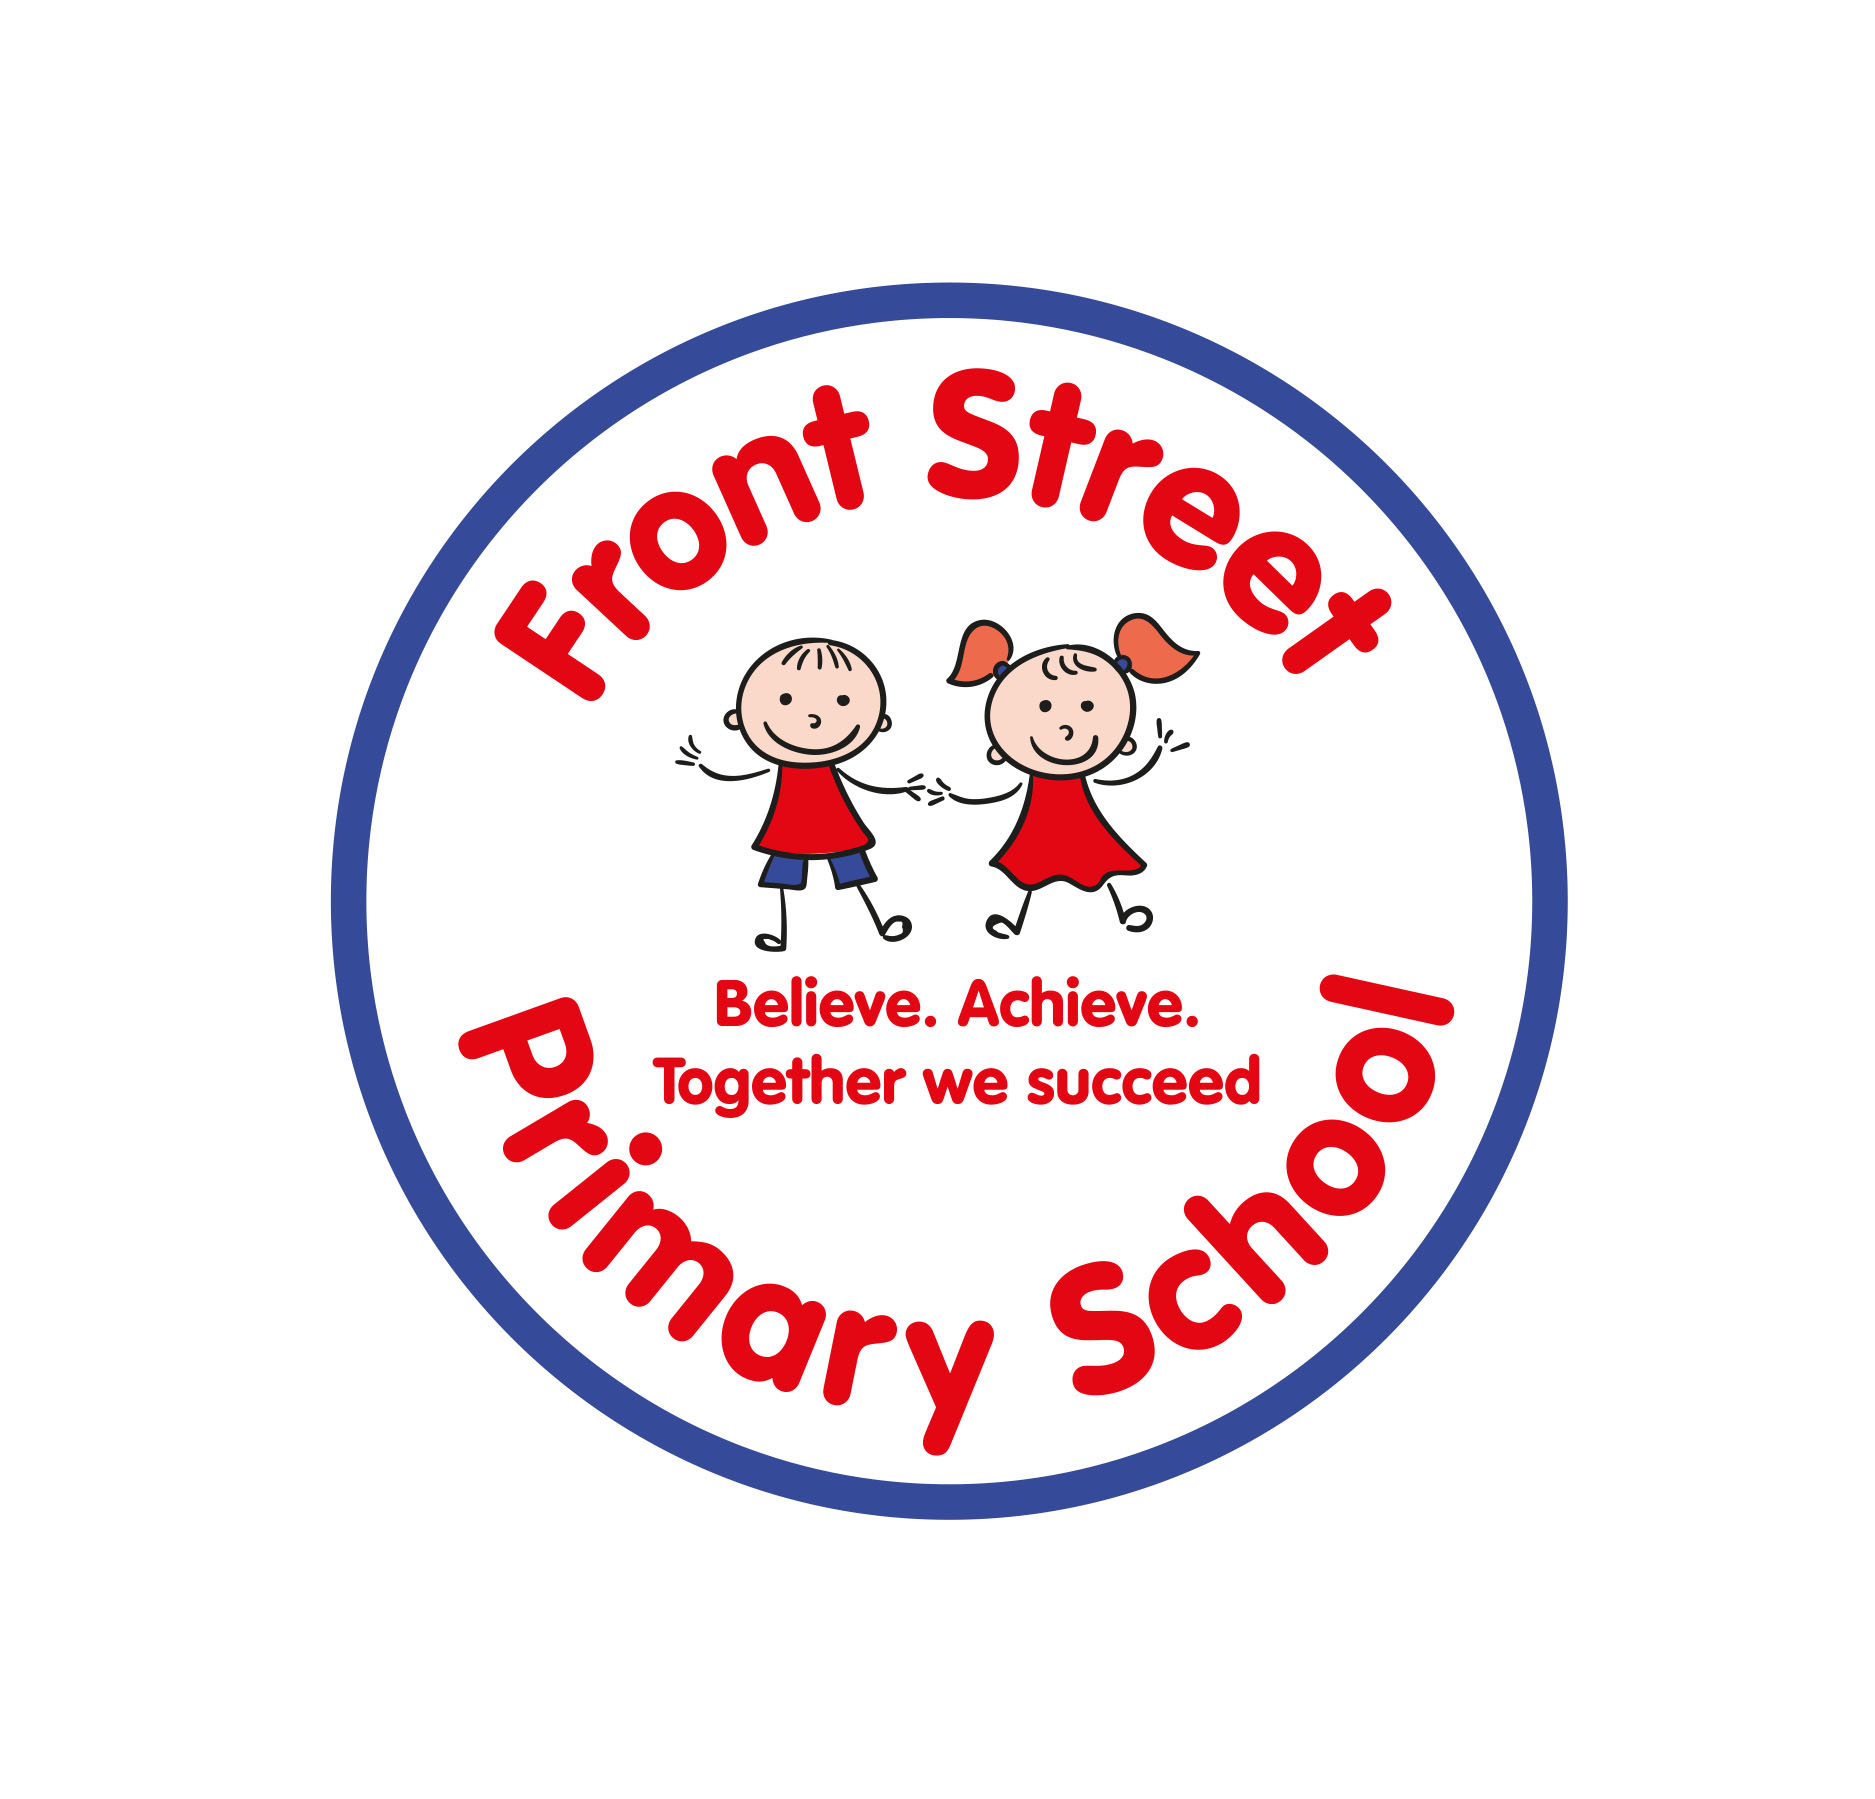 FRONT STREET COMMUNITY PRIMARY SCHOOL EQUAL OPPORTUNITIES AND EQUALITY